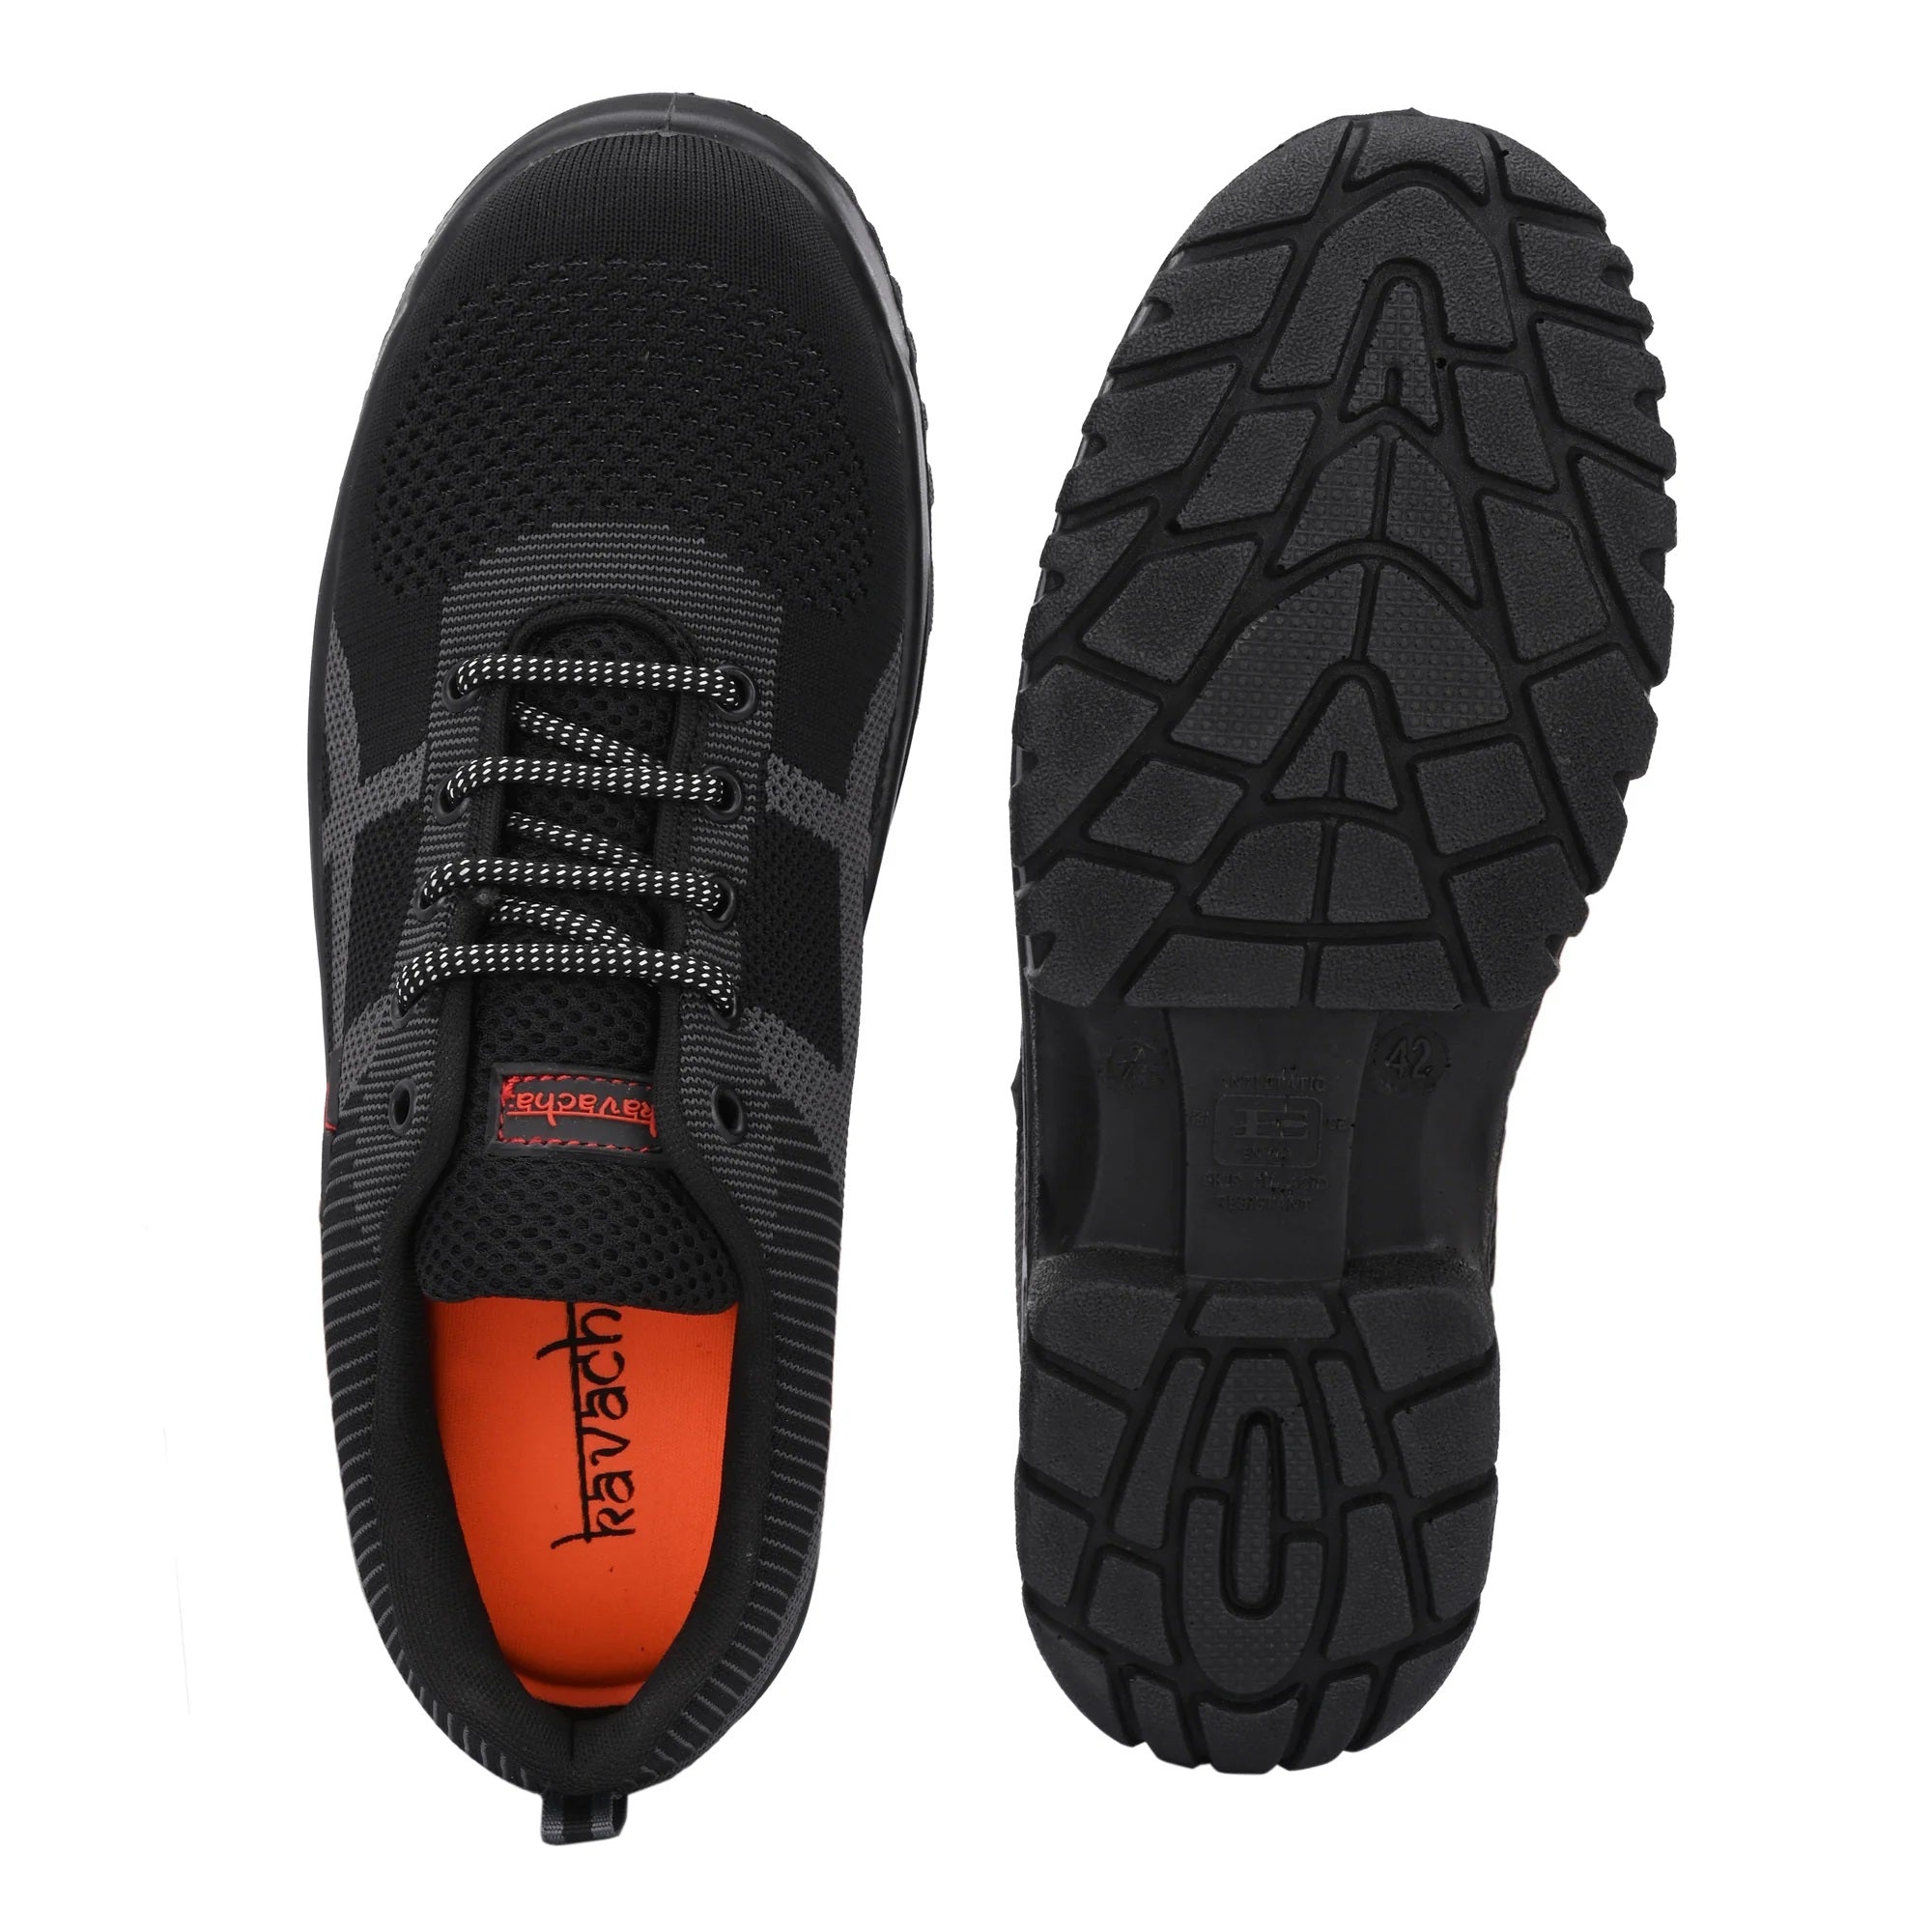 Kavacha Steel Toe Safety Shoe with Knitted Upper and PU Sole Air S211